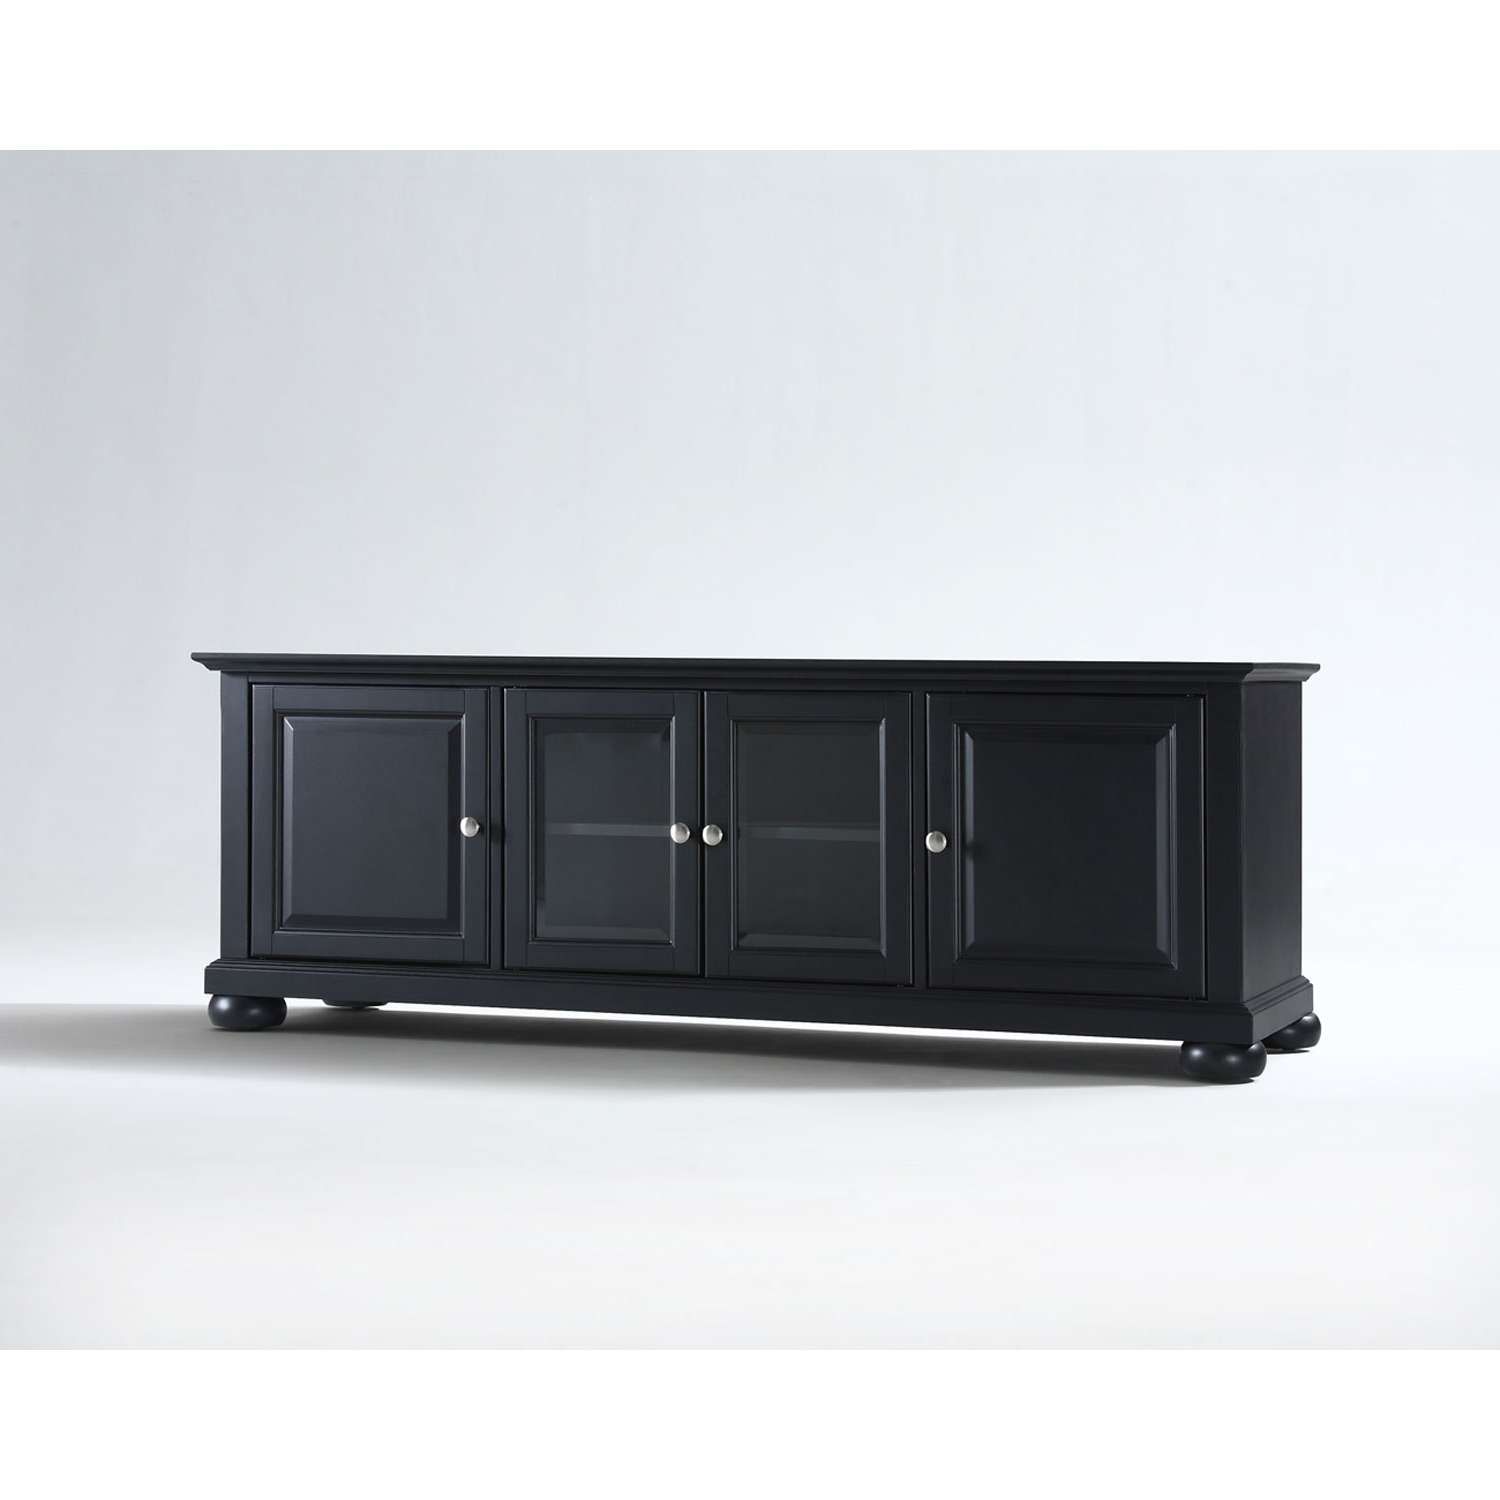 Lovely 84 Inch Tv Stand 79 About Remodel Home Decorating Ideas With Regard To 84 Inch Tv Stands (View 3 of 15)